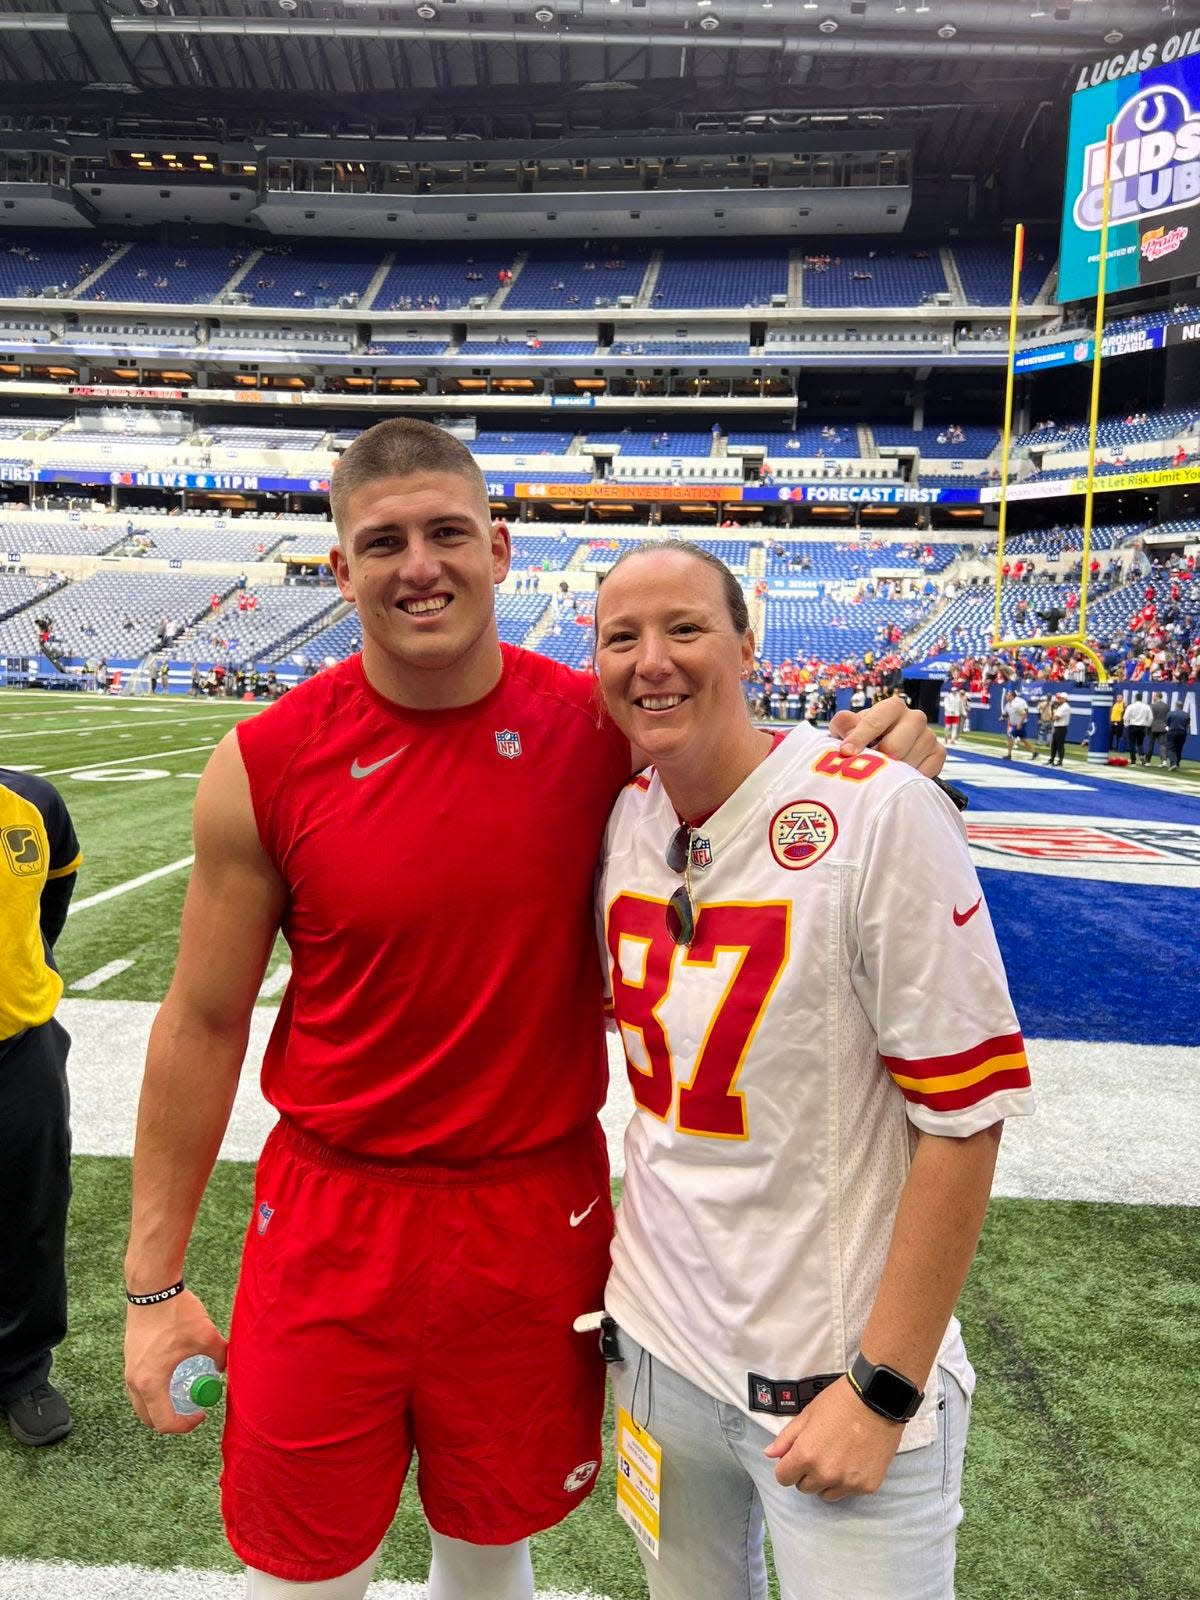 Purdue women's basketball coach Katie Gearlds (right) is shown sharing a smile with Kansas City Chiefs defensive end George Karlaftis.